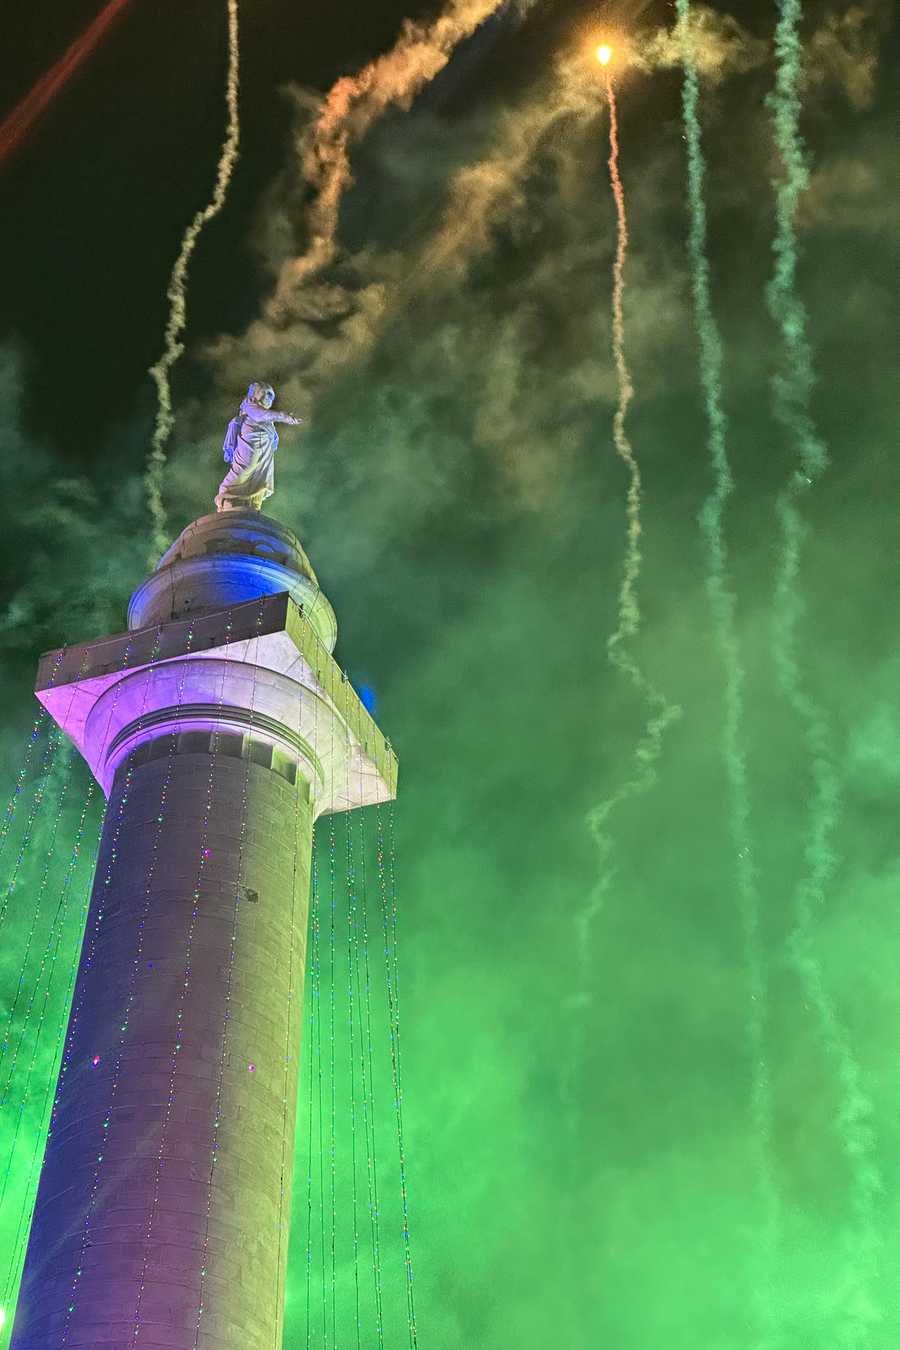 See the 2022 Washington Monument lighting in Baltimore